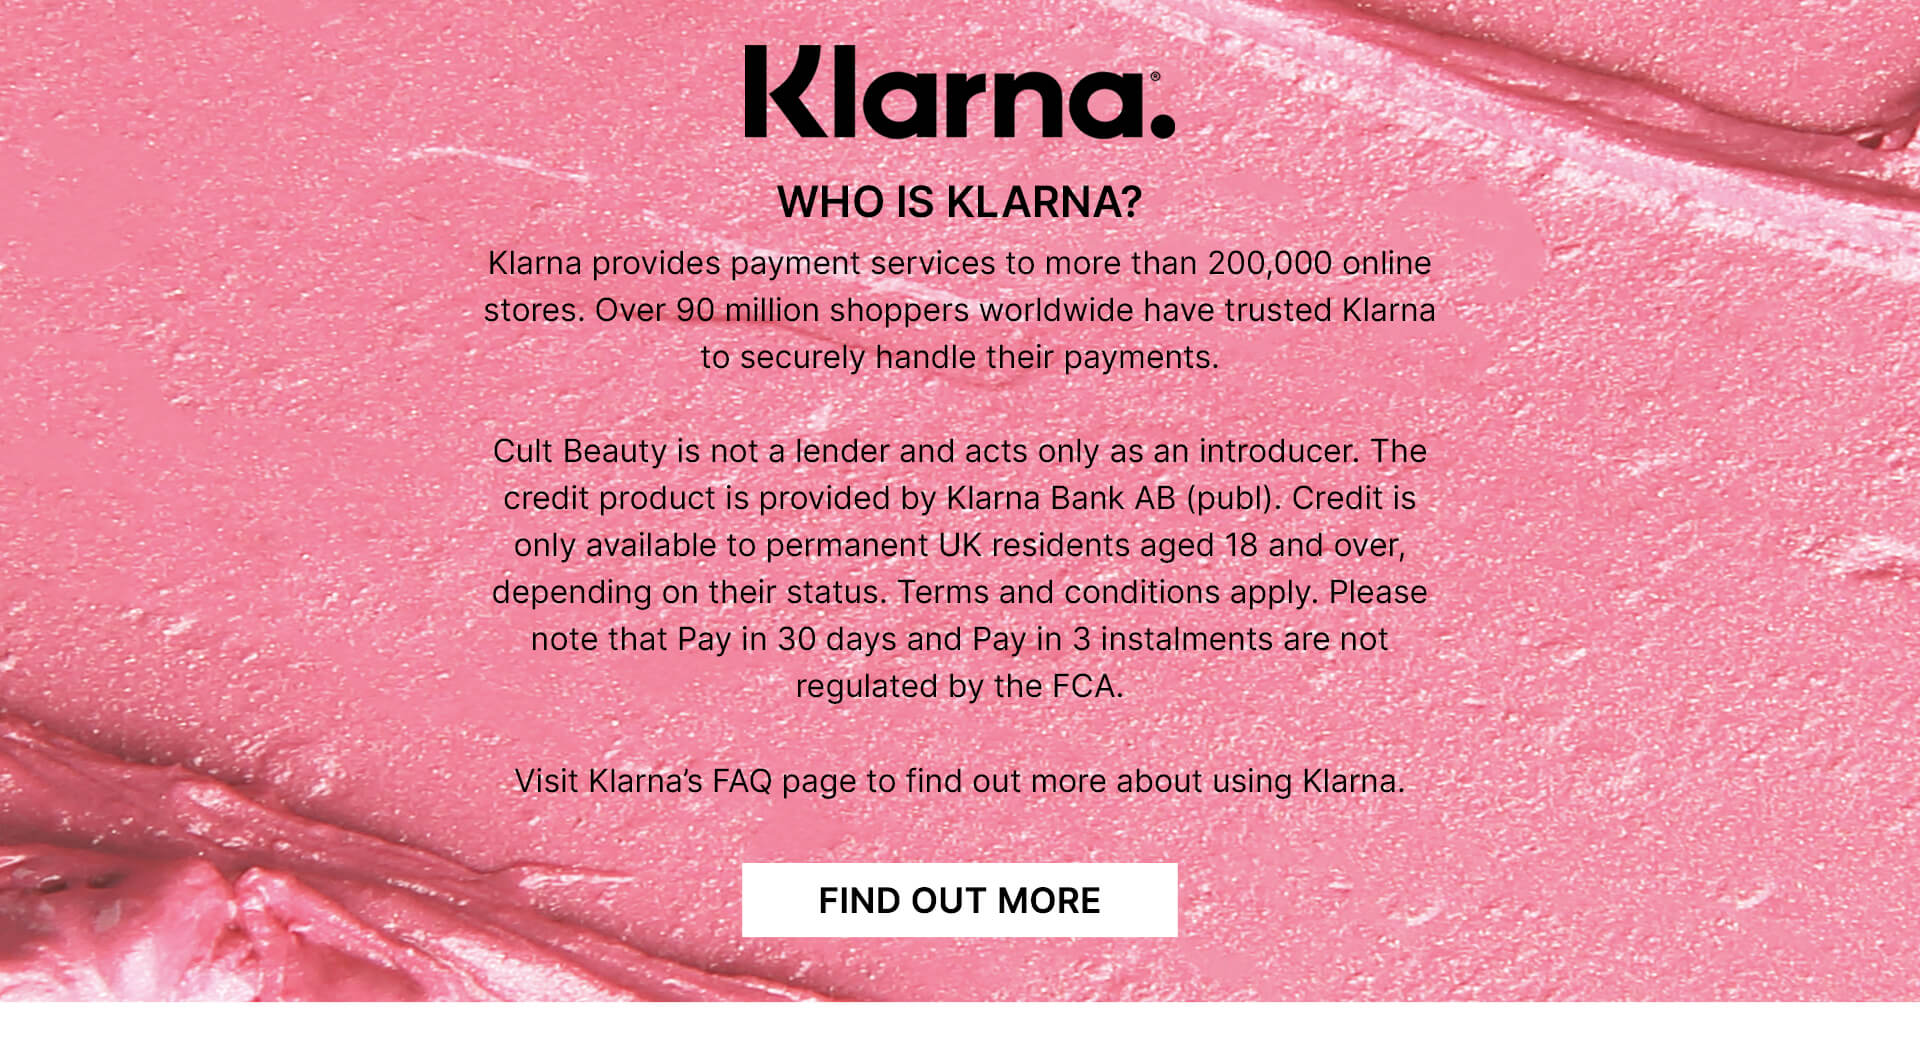 Who is klarna? Klarna provides payment services to more than 200,000 online stores. Over 90 million shoppers worldwide have trusted Klarna to securely handle their payments. Cult Beauty is not a lender and acts only as an introducer. The credit product is provided by Klarna Bank AB (publ). Credit is only available to permanent UK residents aged 18 and over, depending on their status. Terms and conditions apply. Please note that Pay in 30 days and Pay in 3 instalments are not regulated by the FCA. Visit Klarna's FAQ page to find out more about using Klarna.